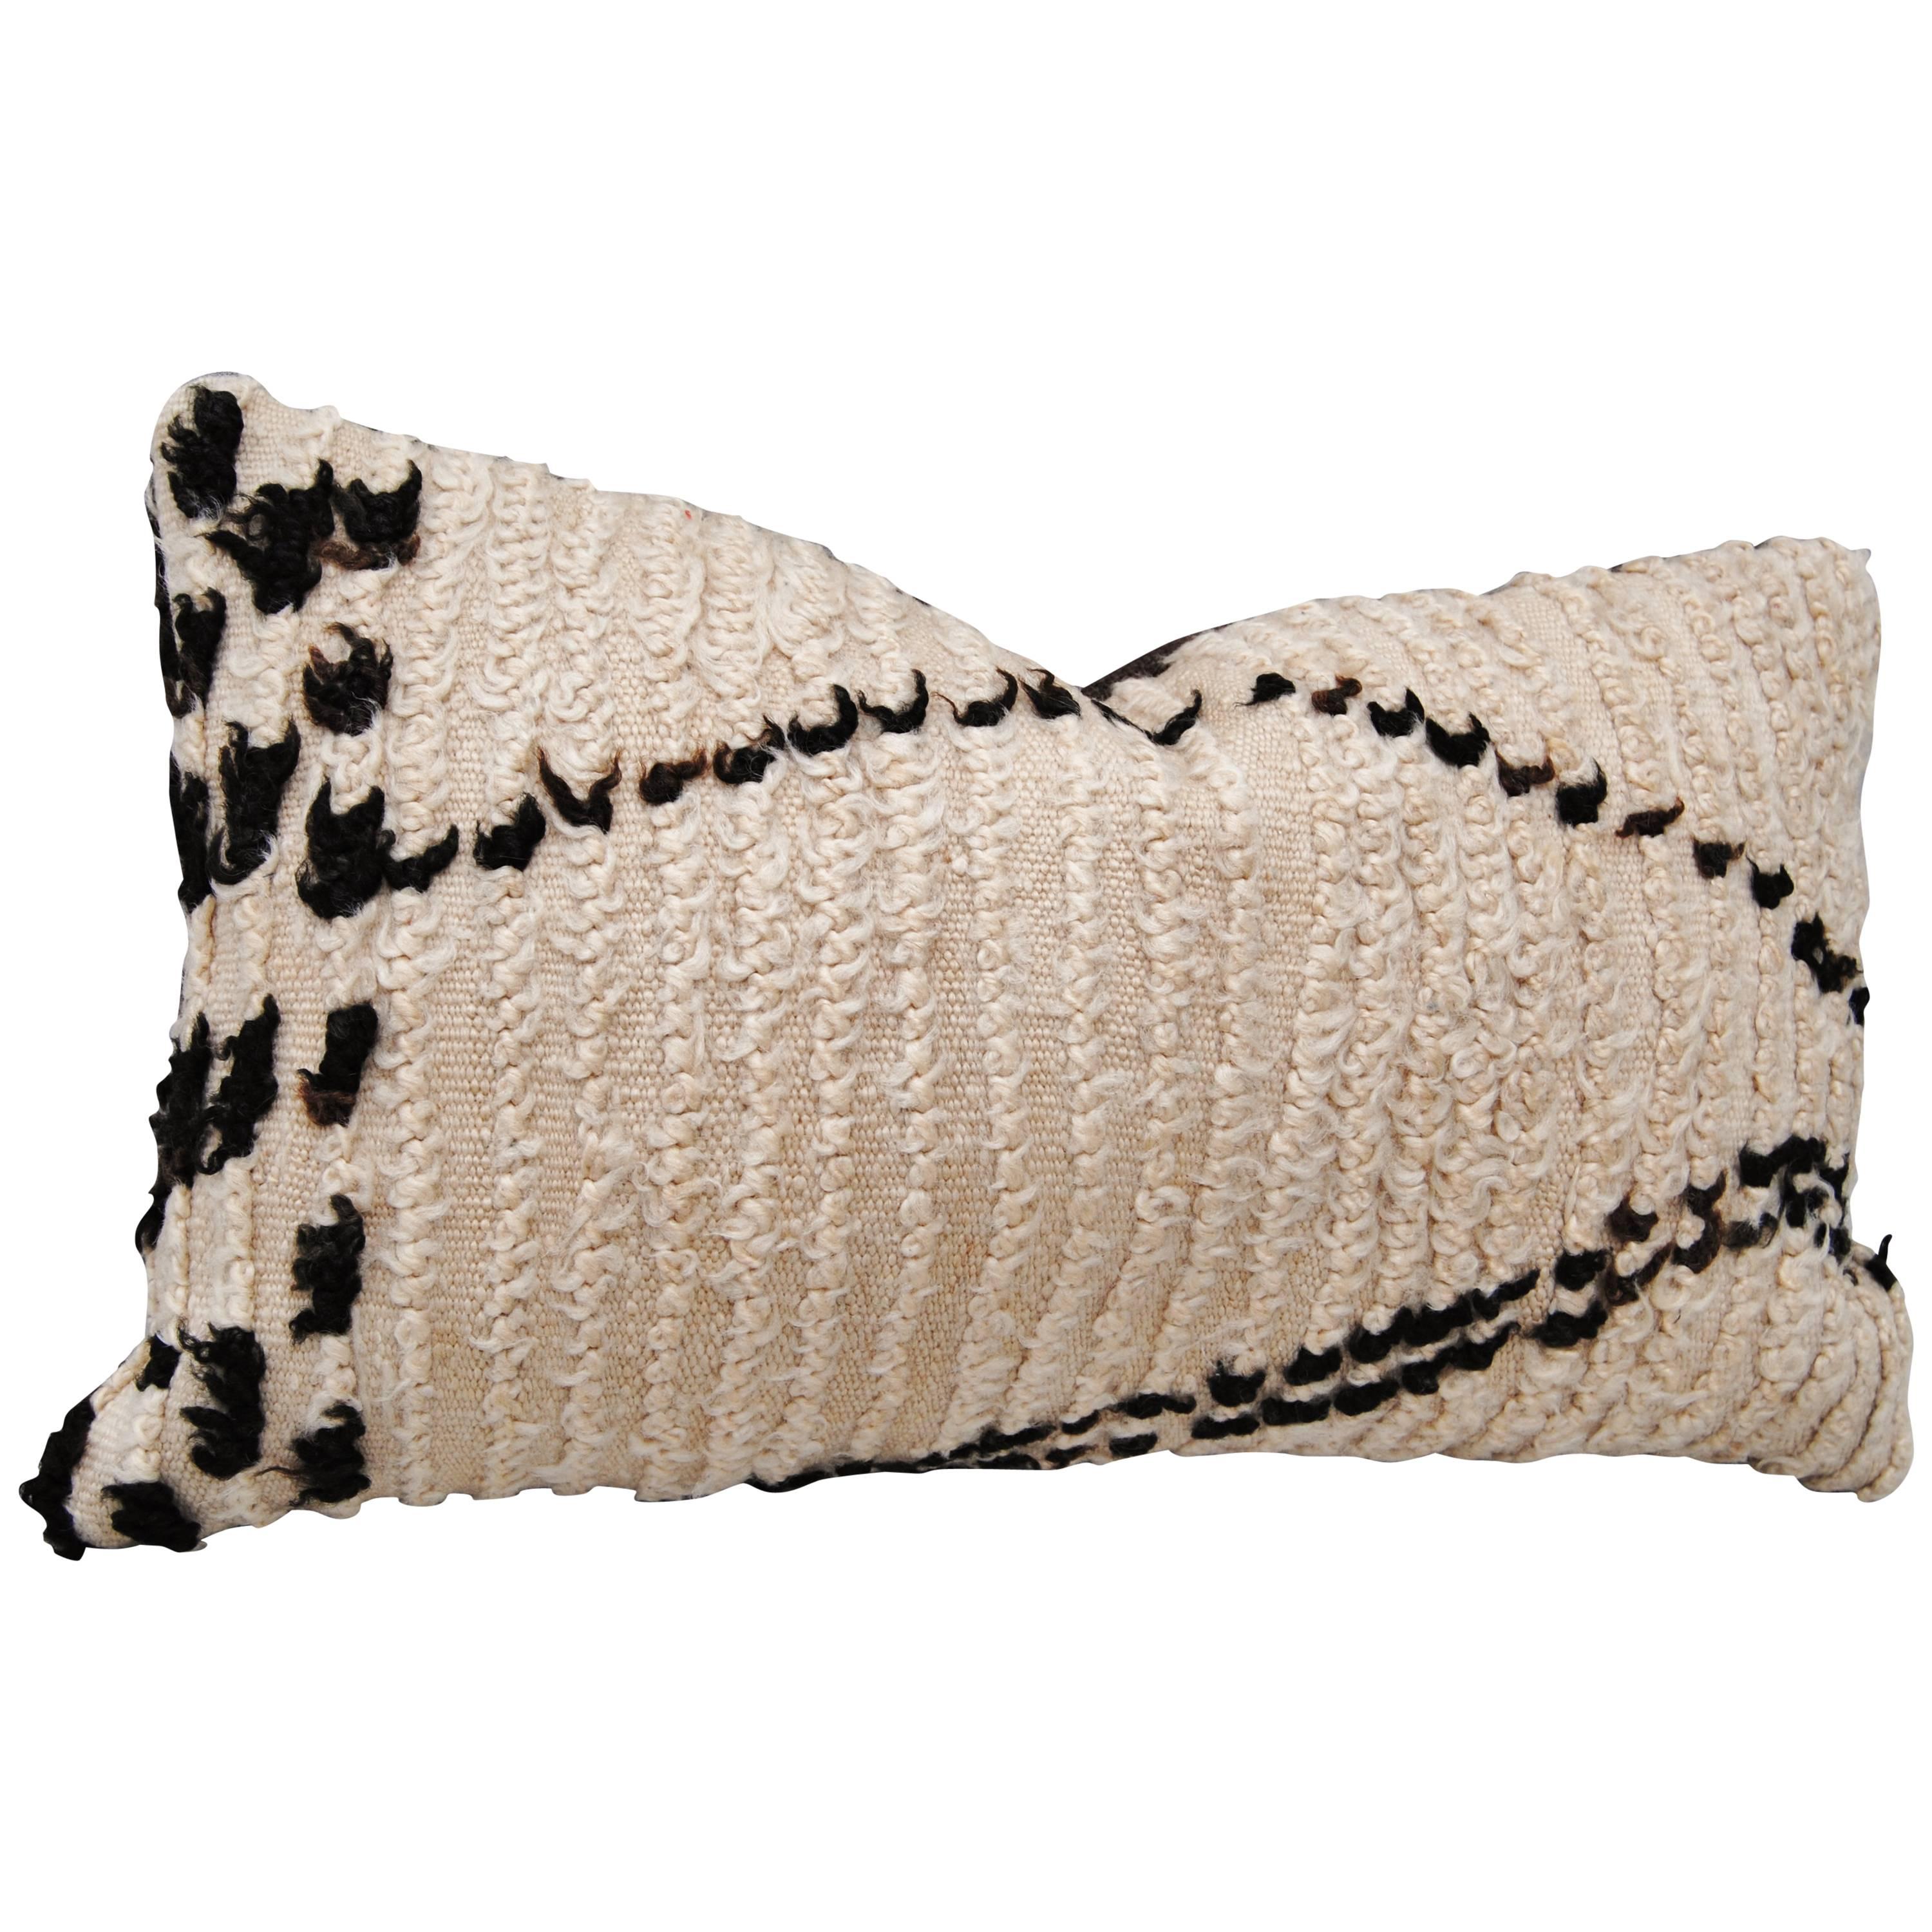 Vintage Hand Loomed Wool Beni Ouarian Moroccan Pillow, Atlas Mountains For Sale